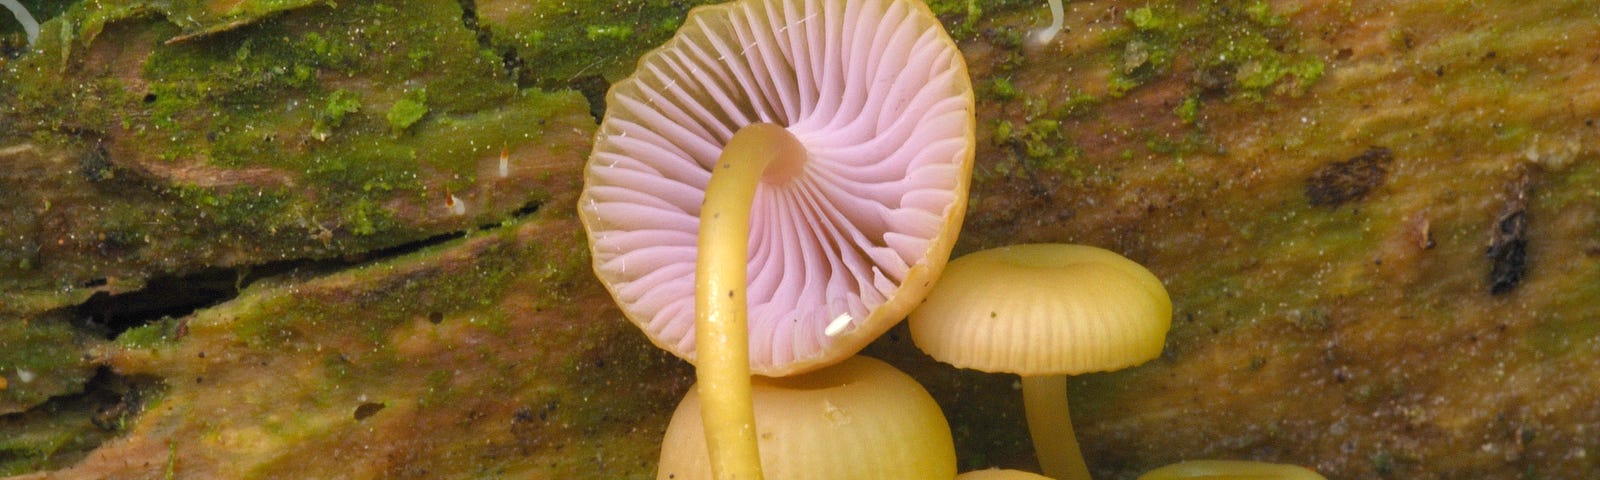 Five yellow mushrooms growing under on a mossy log. The largest mushroom shows the pink underside.